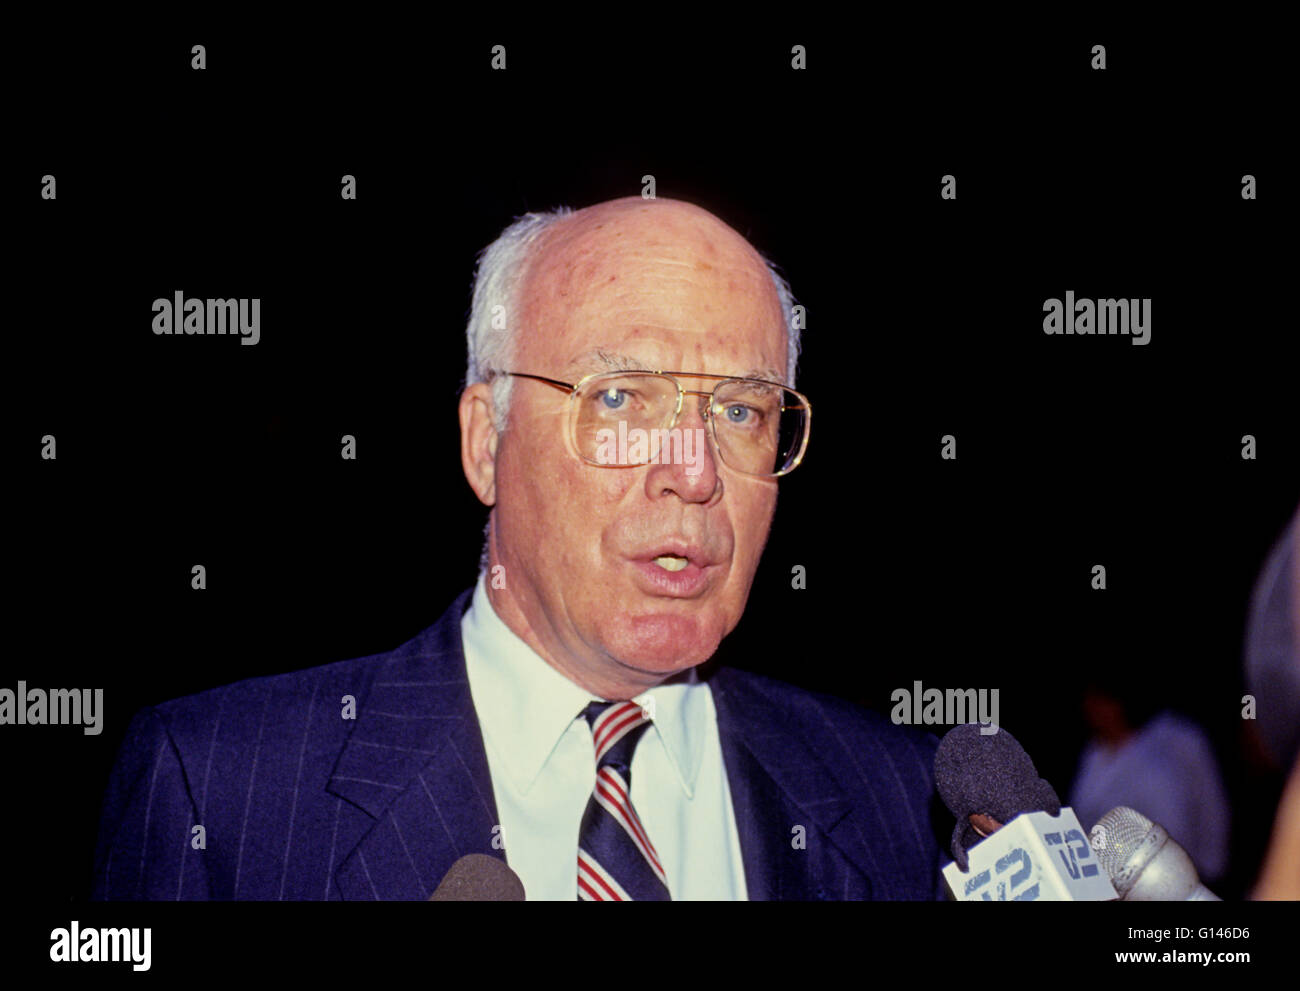 United States Senator Patrick Leahy (Democrat of Vermont) is interviewed following the US Senate vote to confirm Judge Clarence Thomas to be Associate Justice of the US Supreme Court in Washington, DC on October 15, 1991. The vote was 52 - 48 in Thomas' favor. Credit: Ron Sachs/CNP - NO WIRE SERVICE - Stock Photo